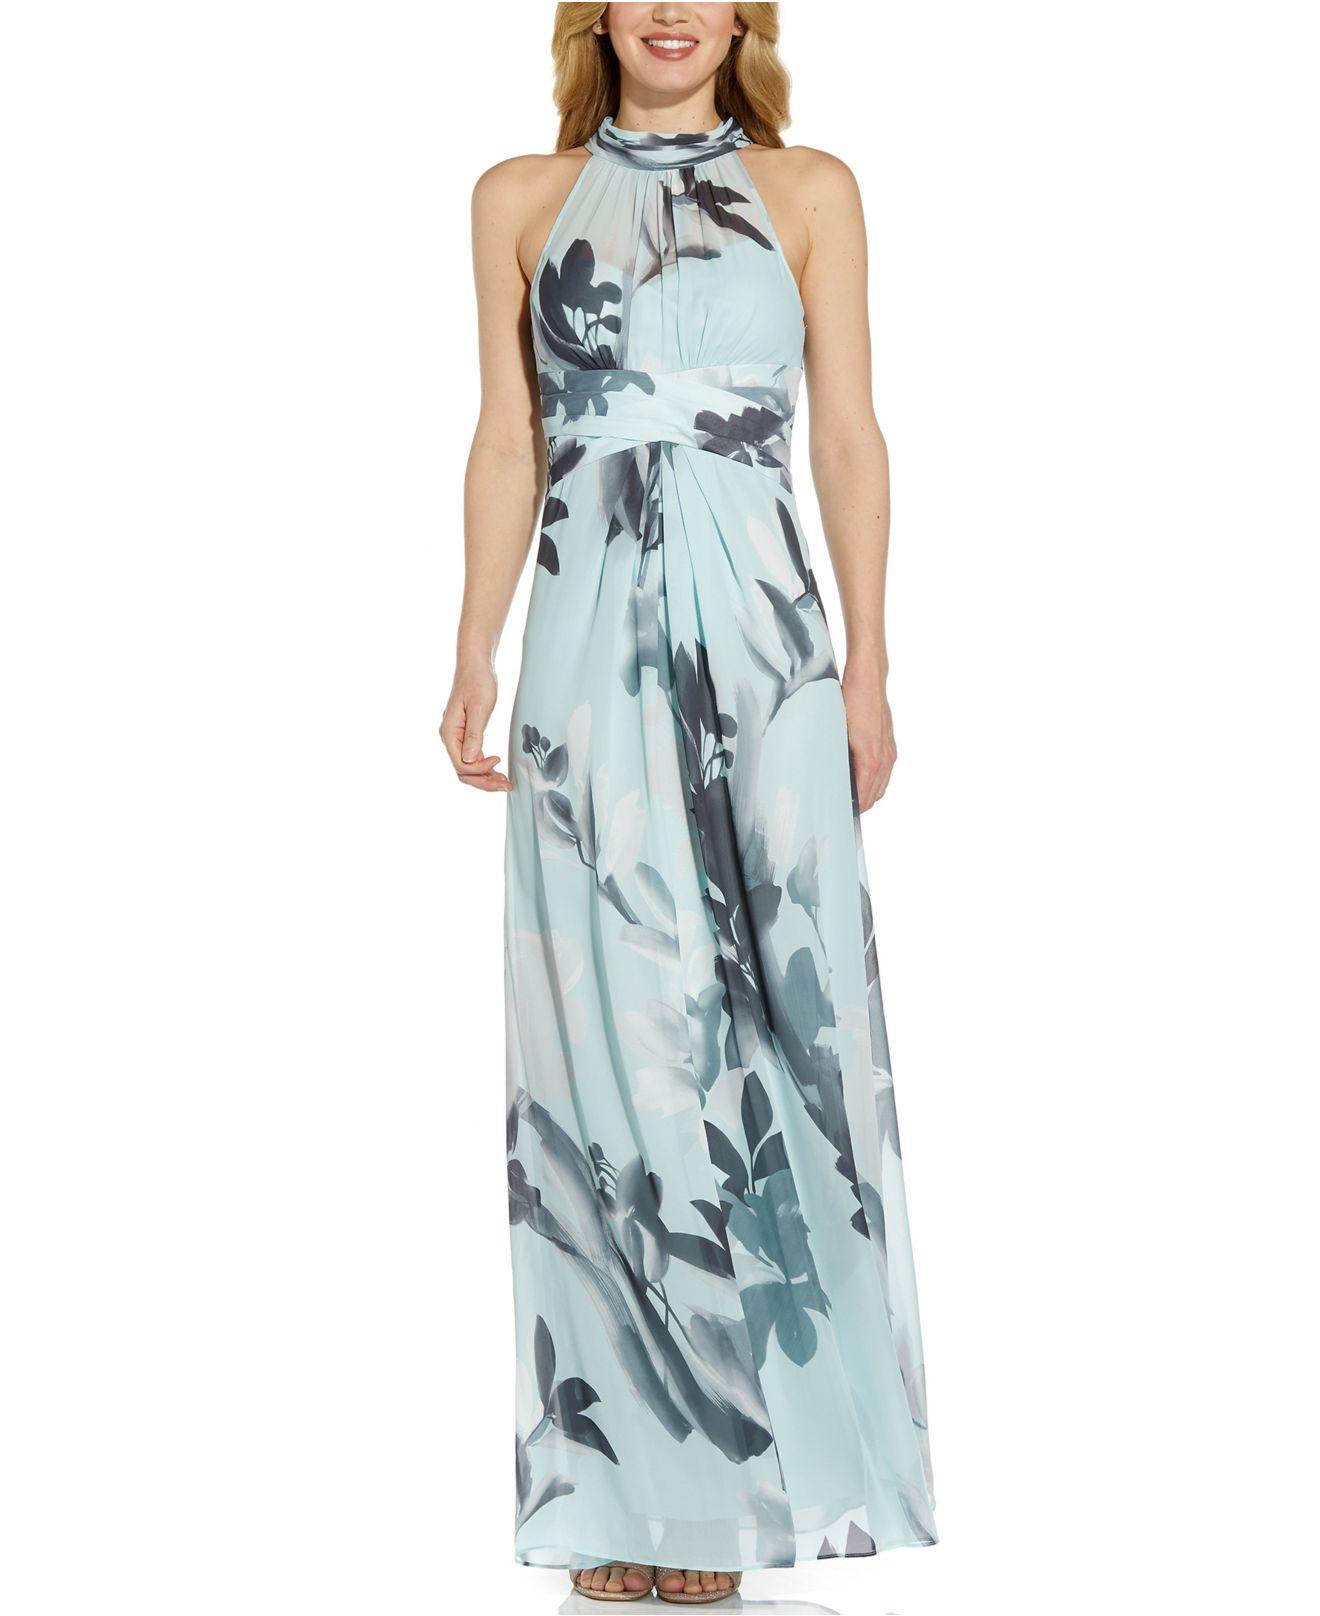 Adrianna Papell Printed-chiffon Halter Gown in Mint Floral (Blue 